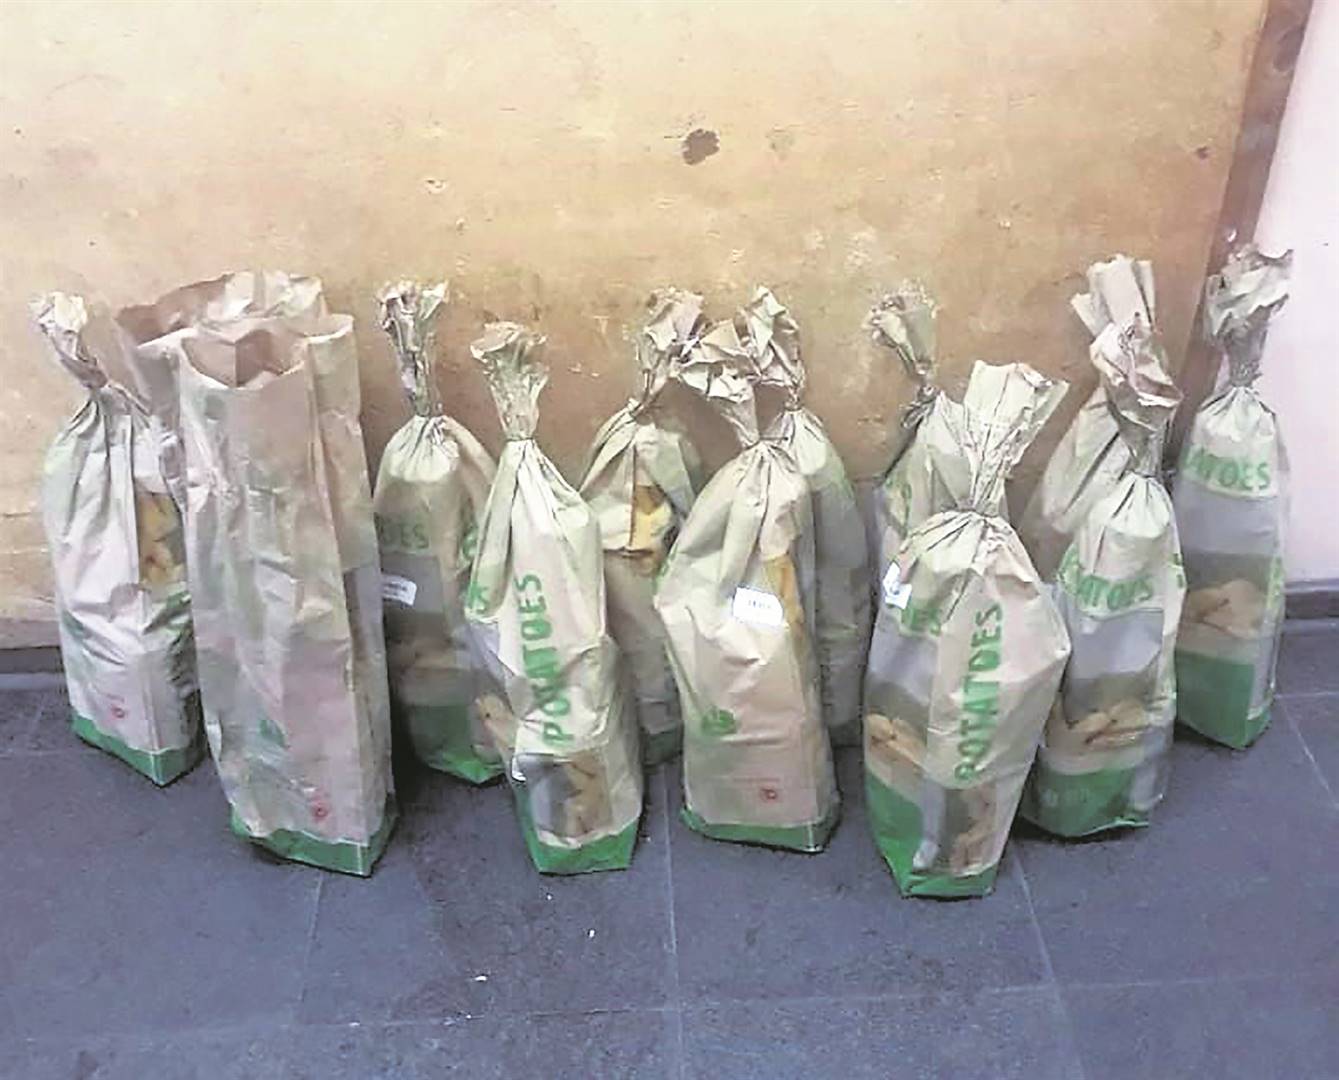 Cops bust a store owner who sold booze hidden in potato bags. 